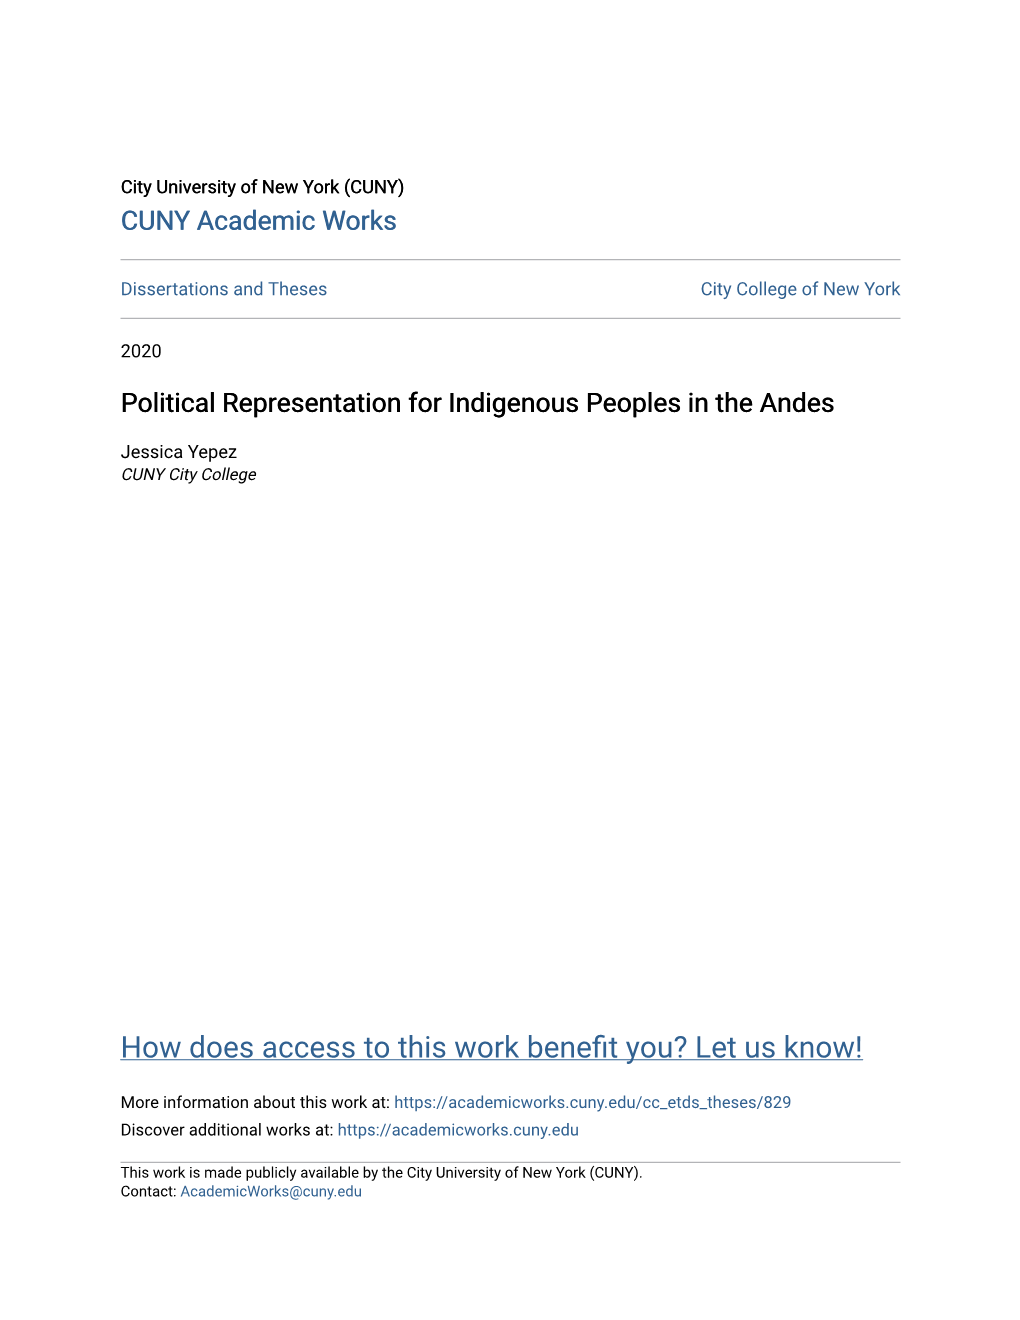 Political Representation for Indigenous Peoples in the Andes